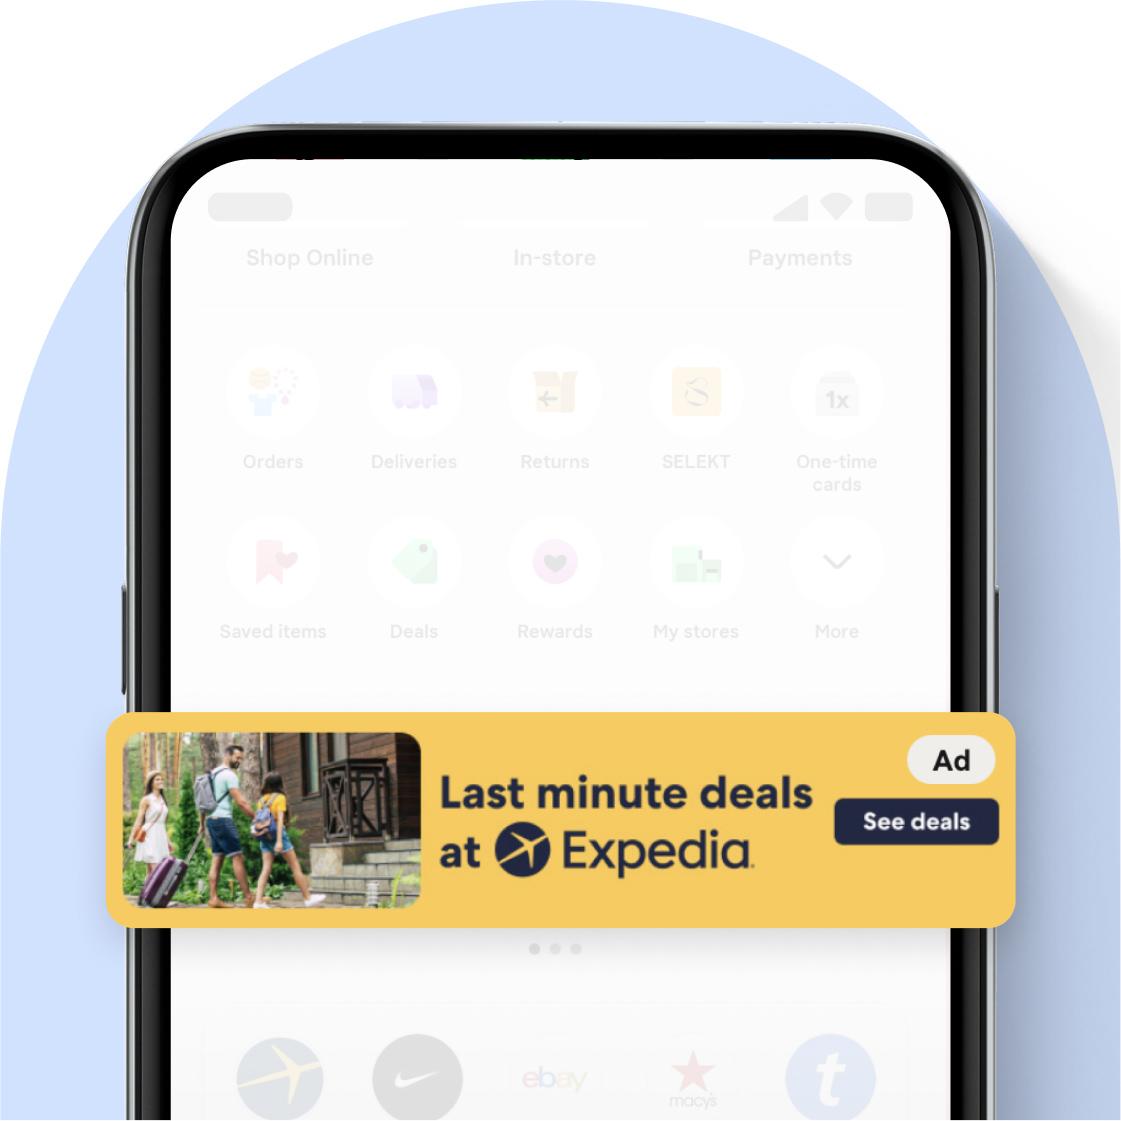 Stores or products; showing screen with expedia highlighted